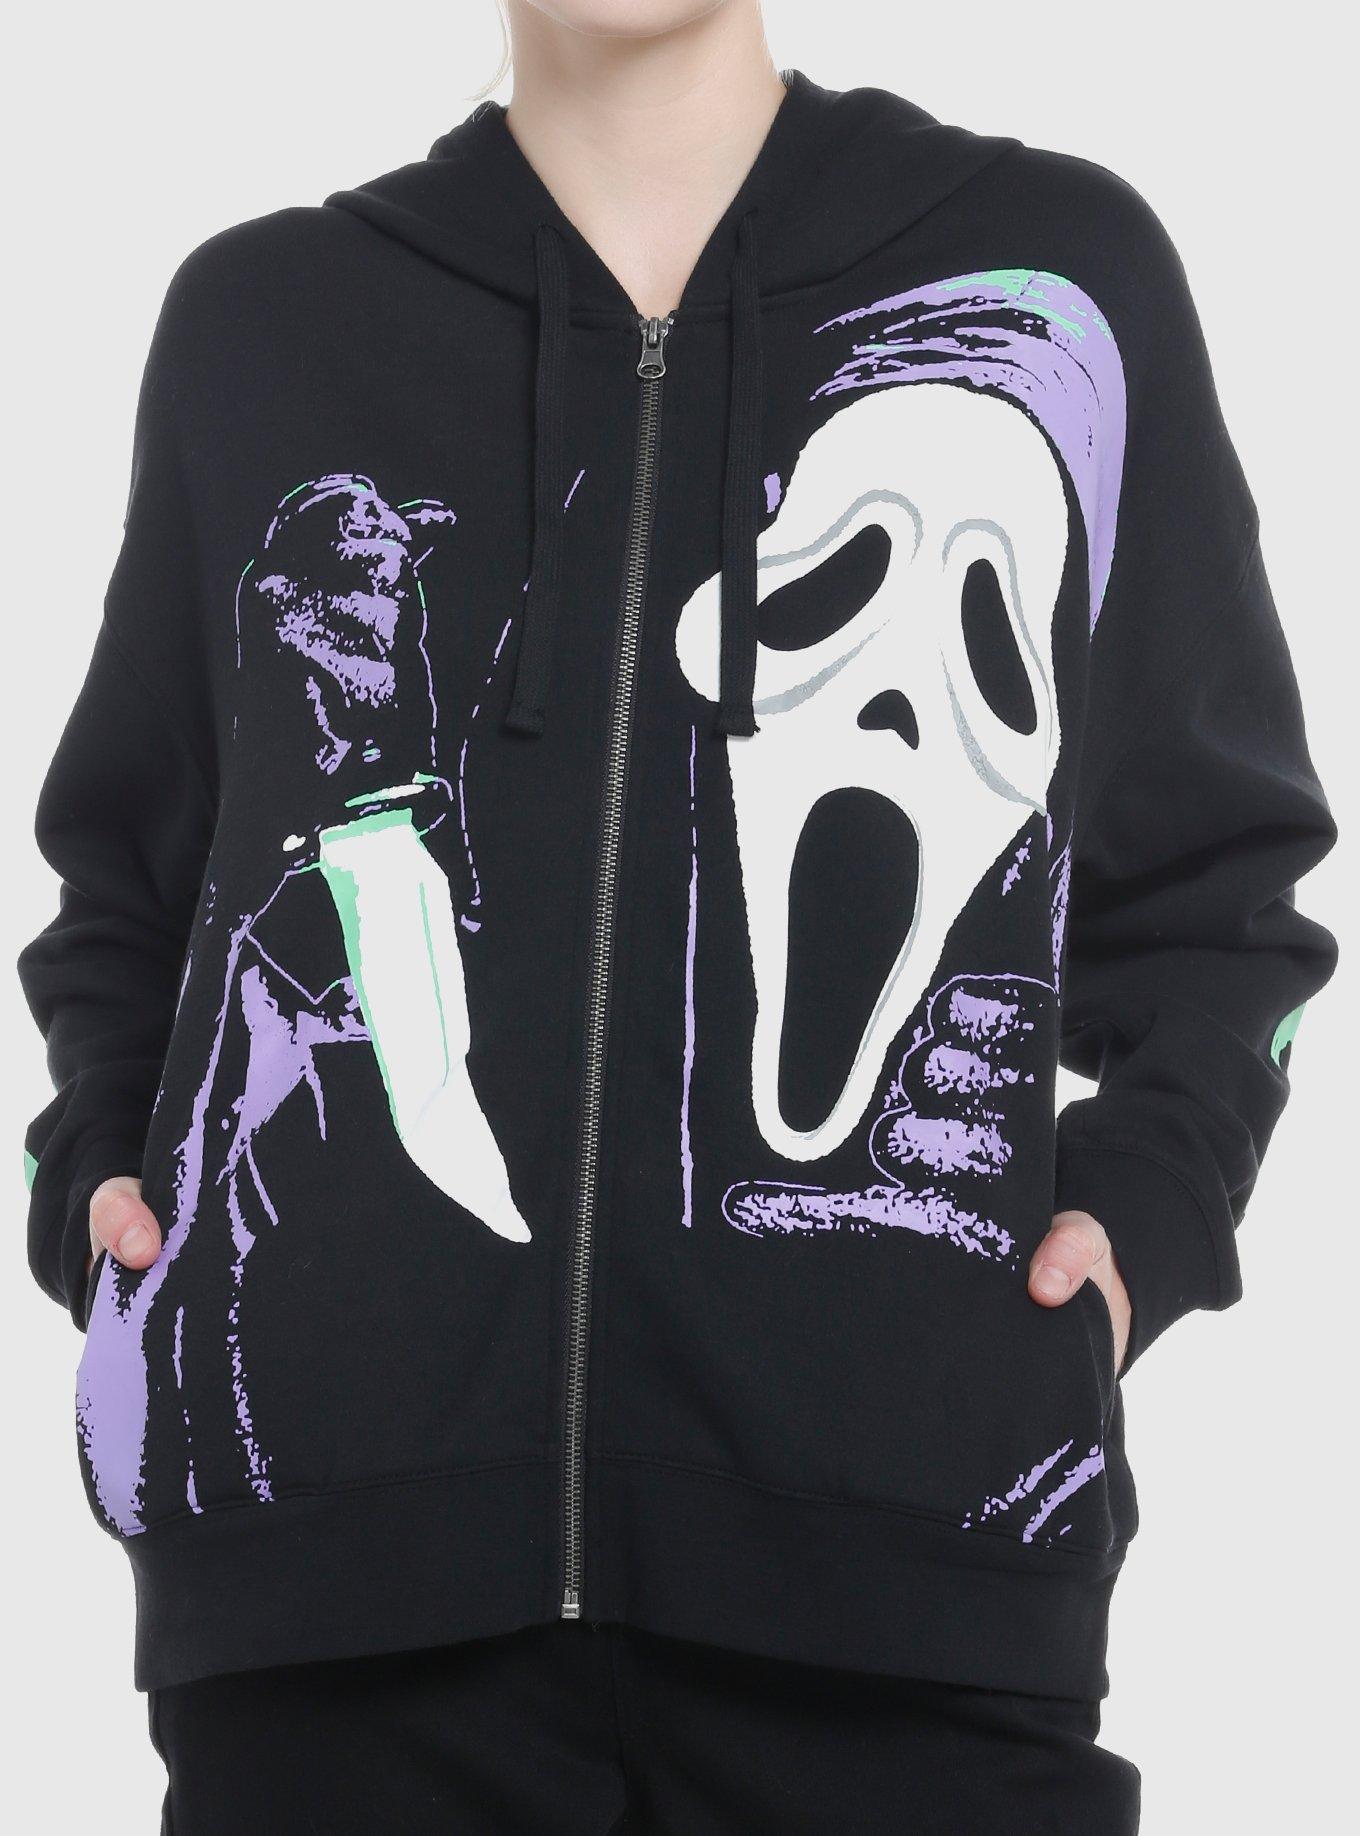 Ghostface want To Watch Scary Movies? Men's Black Graphic Hoodie